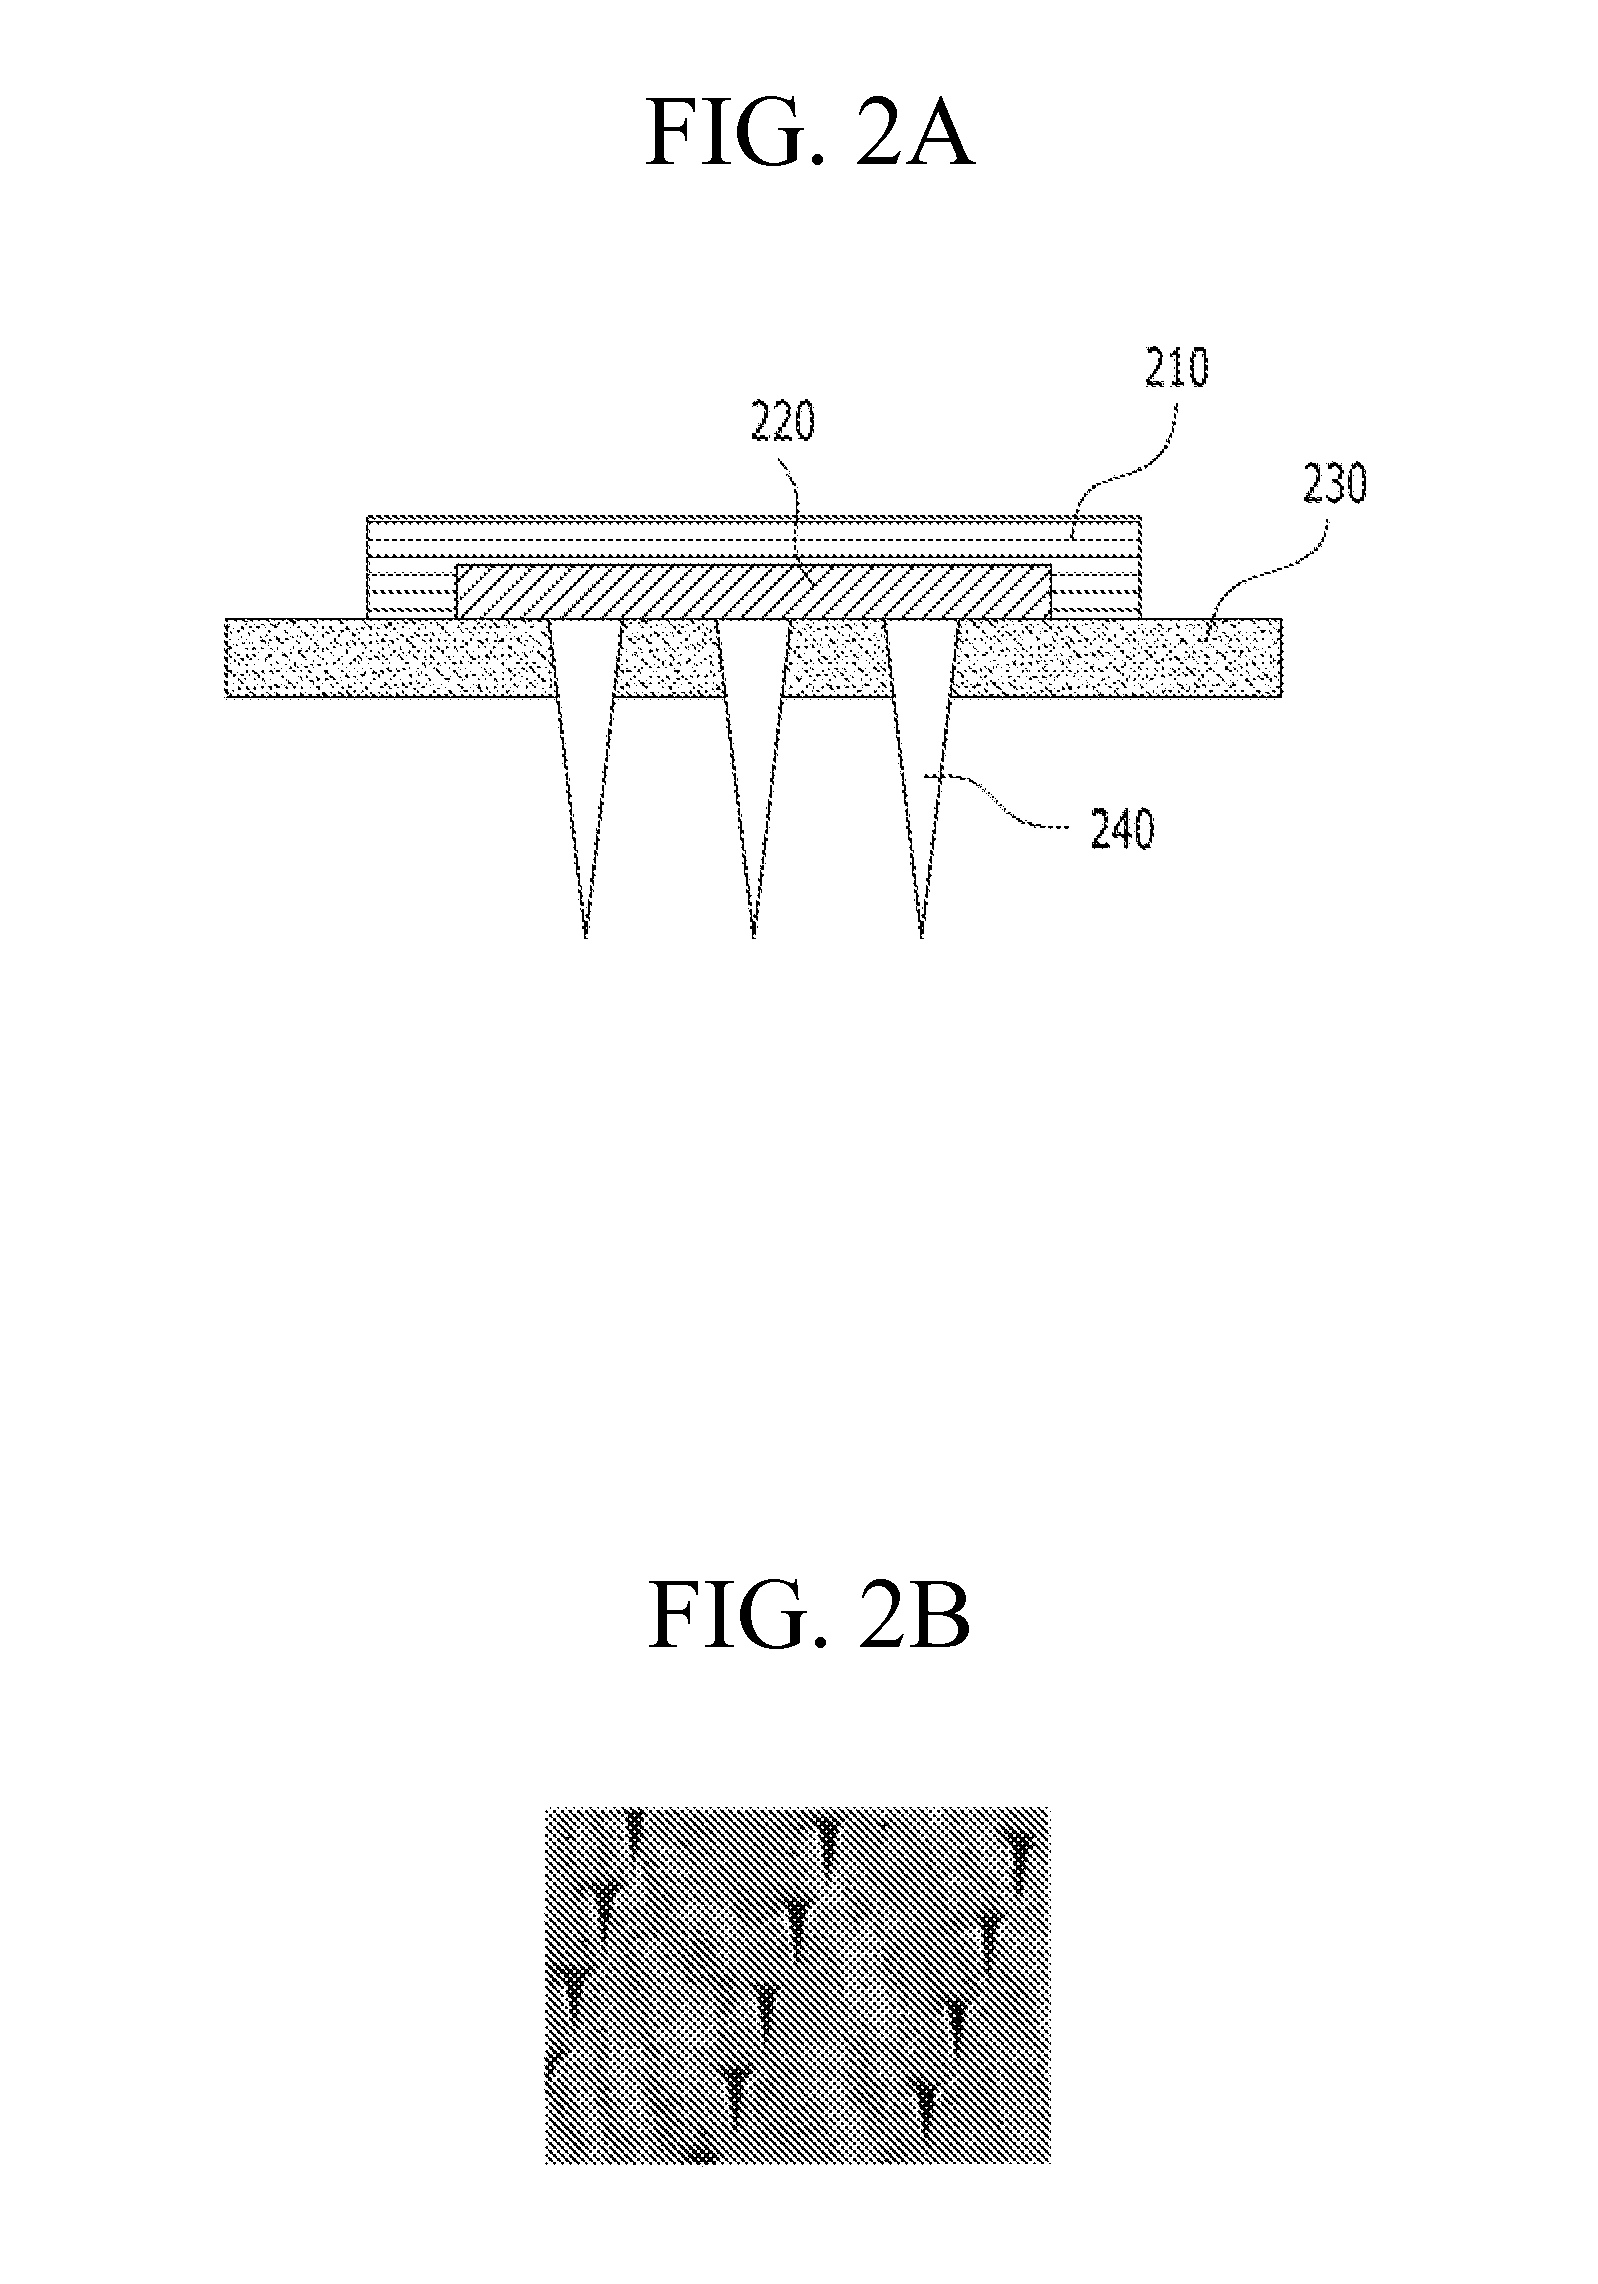 Soluble microneedle arrays for buccal delivery of vaccines